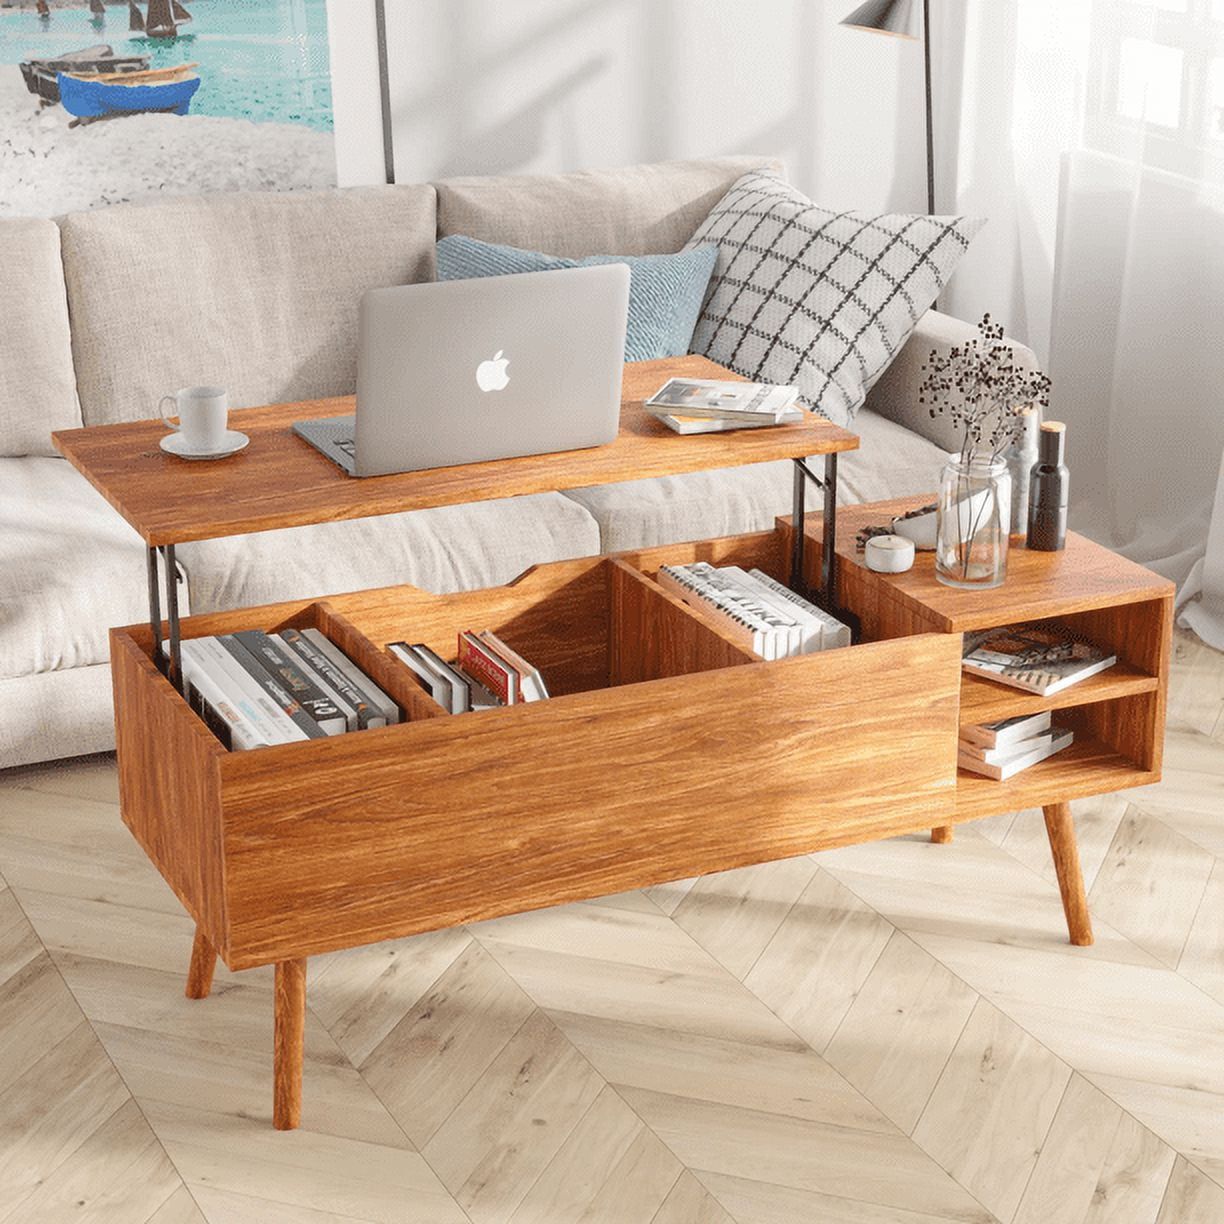 Modern Lift Top Coffee Table With Hidden Compartment Storage,adjustable  Wood Table For Living Room,brown – Walmart Inside Lift Top Coffee Tables With Shelves (Photo 1 of 15)